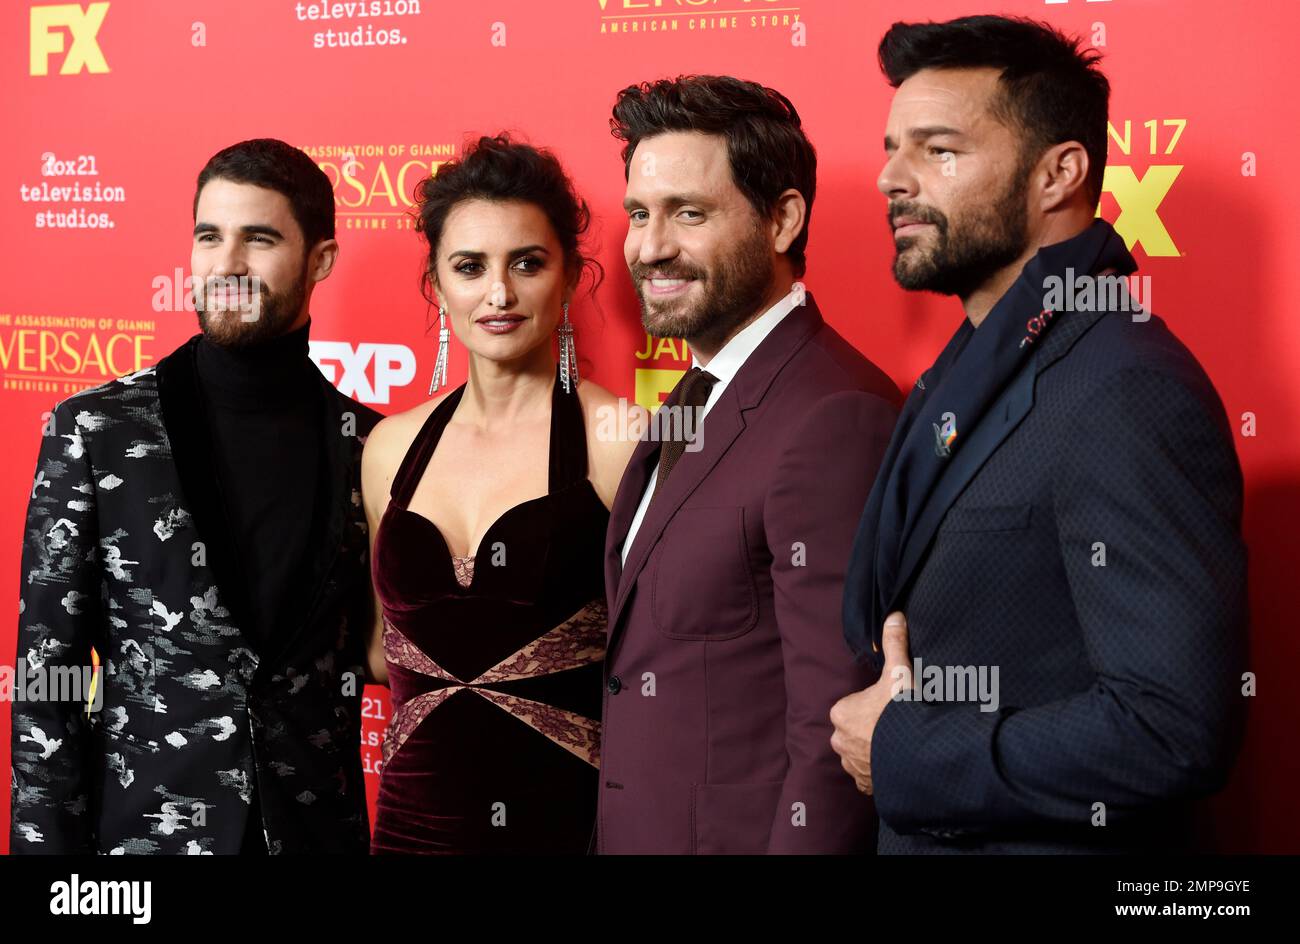 From left, Darren Criss, Penelope Cruz, Edgar Ramirez and Ricky Martin, cast  members in "The Assassination of Gianni Versace: American Crime Story,"  pose together at a special screening of the television series